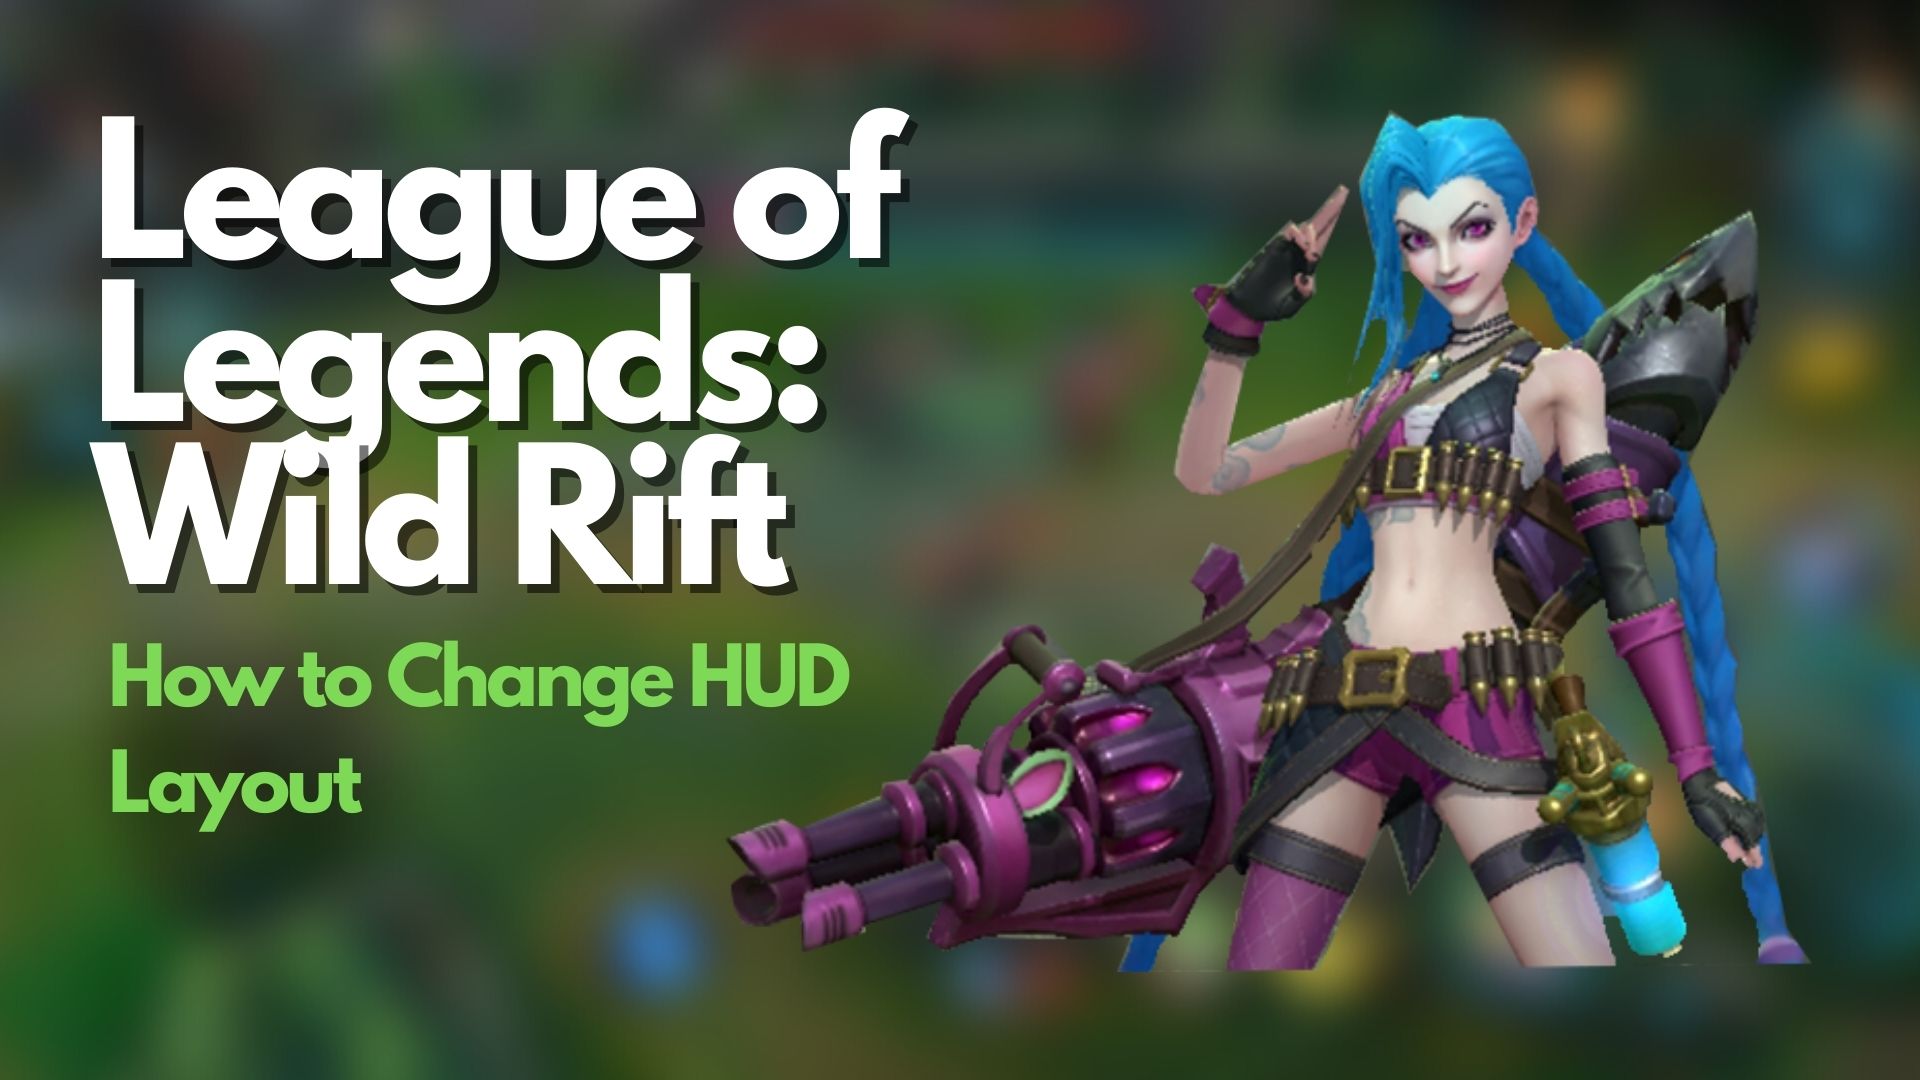 League of Legends: Wild Rift - How to Change HUD Layout